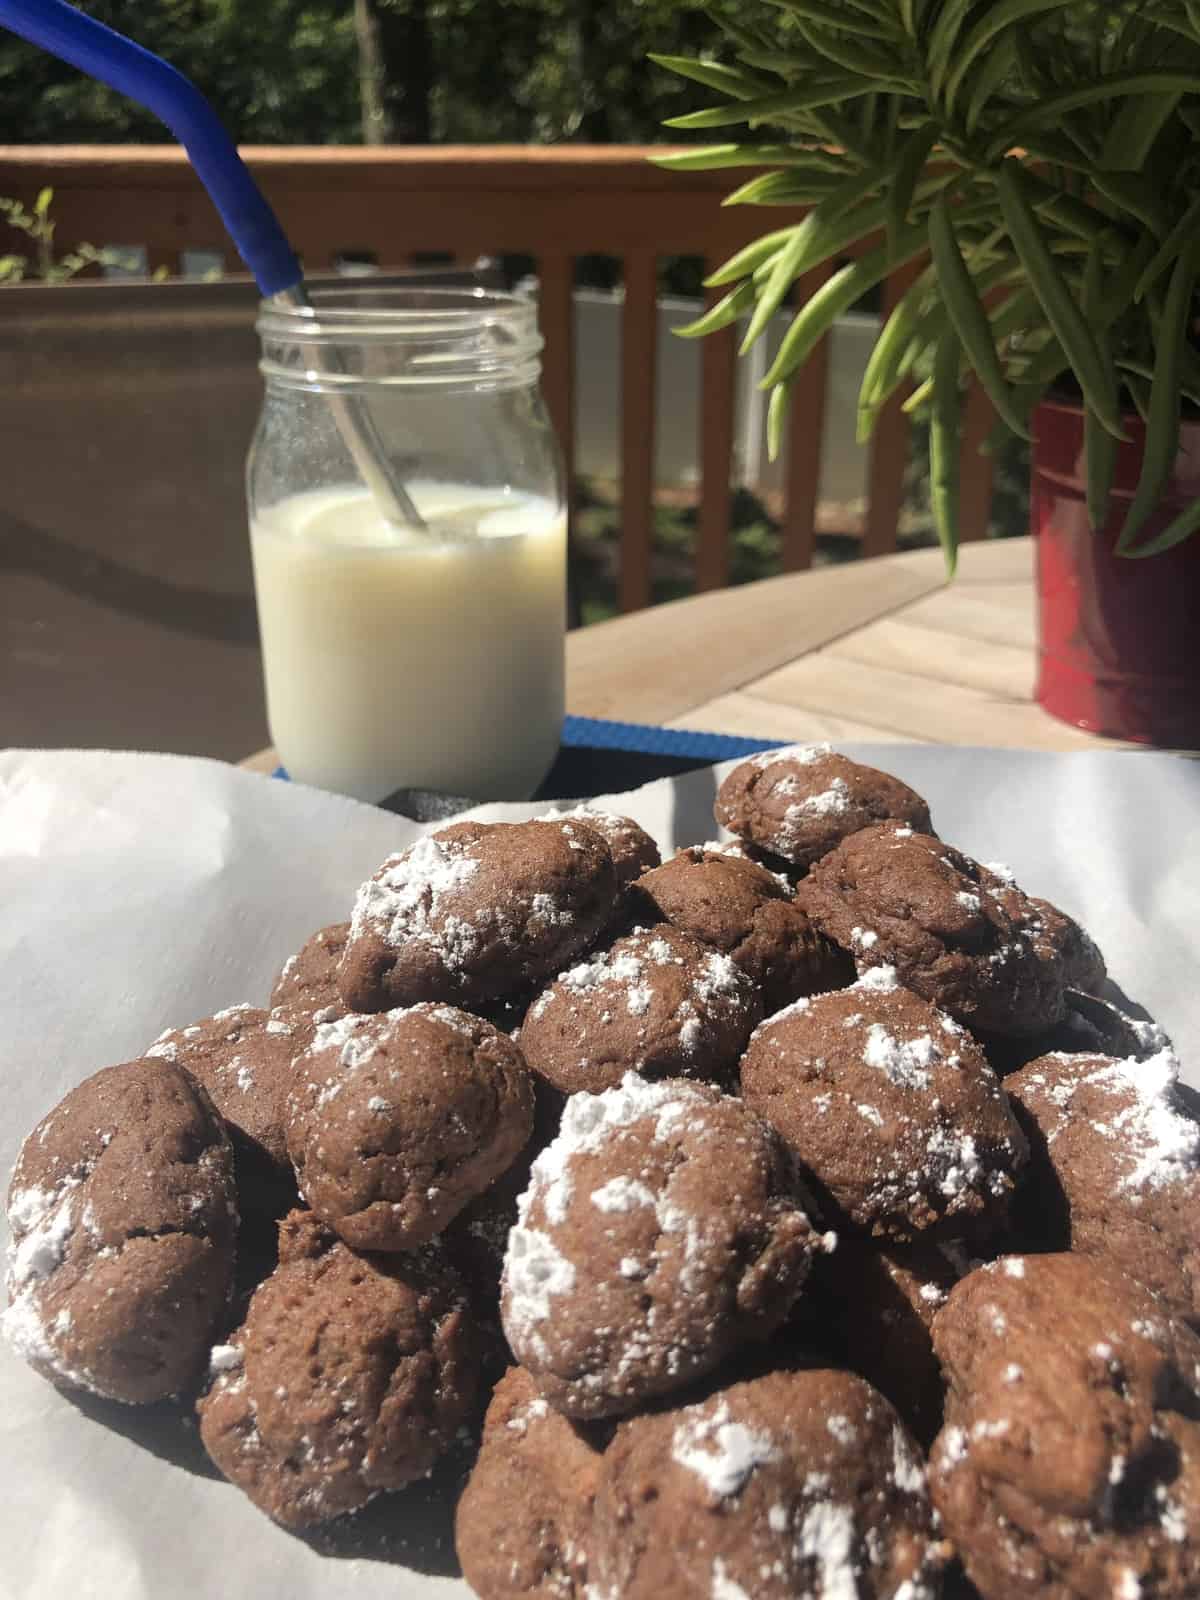 a pile of chocolate bon bons on parchment paper with a glass of milk